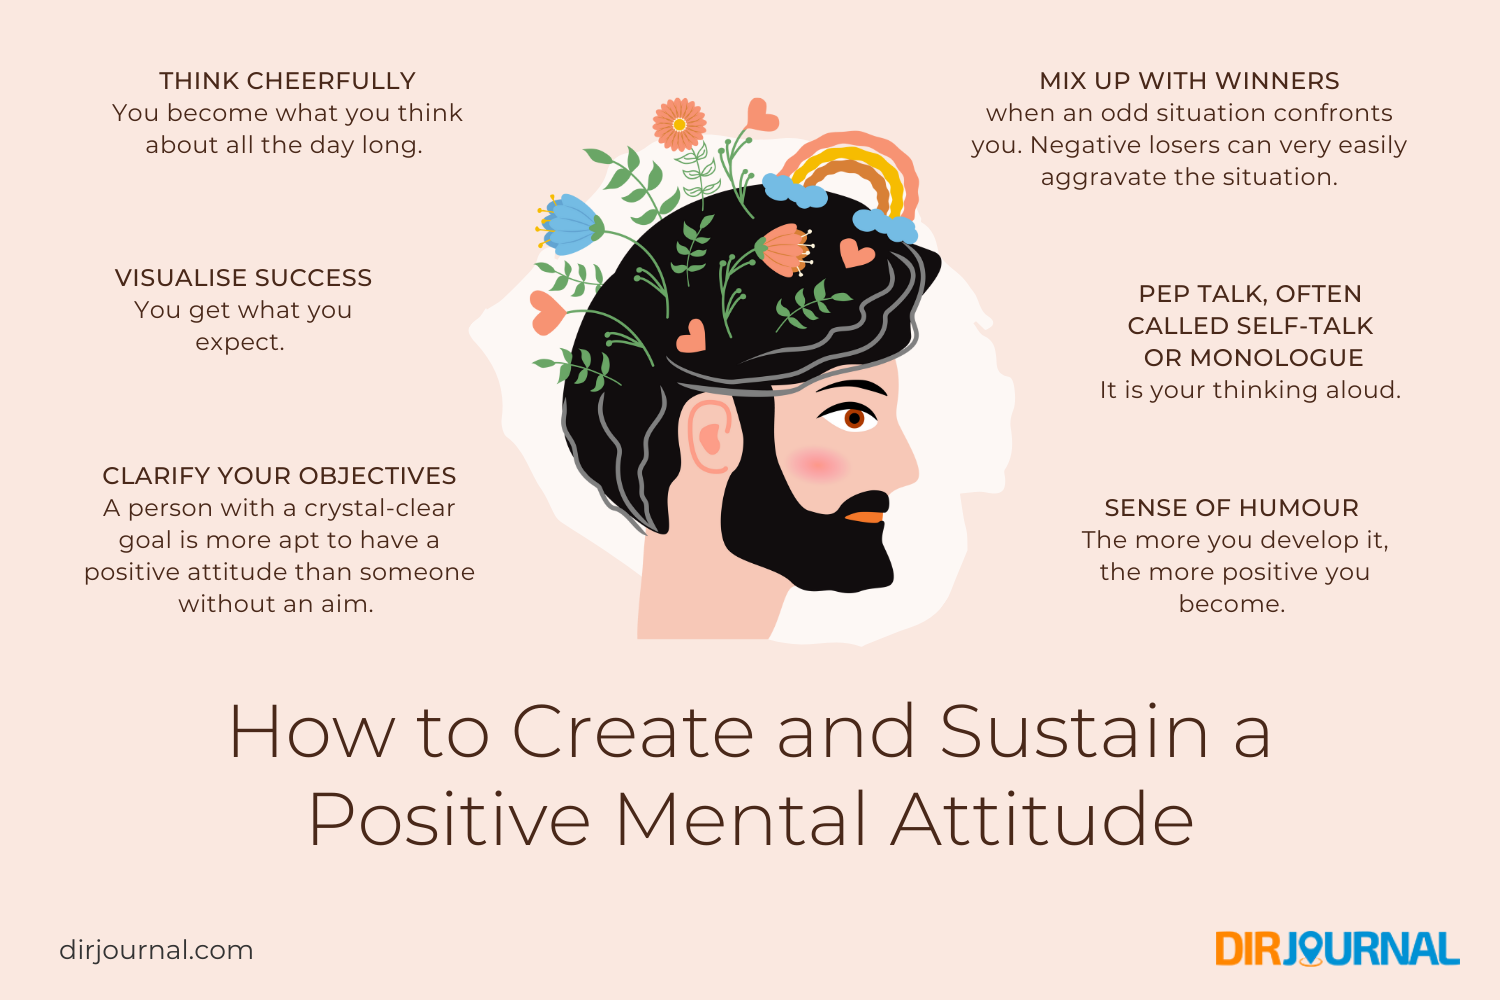 How to Create and Sustain a Positive Mental Attitude